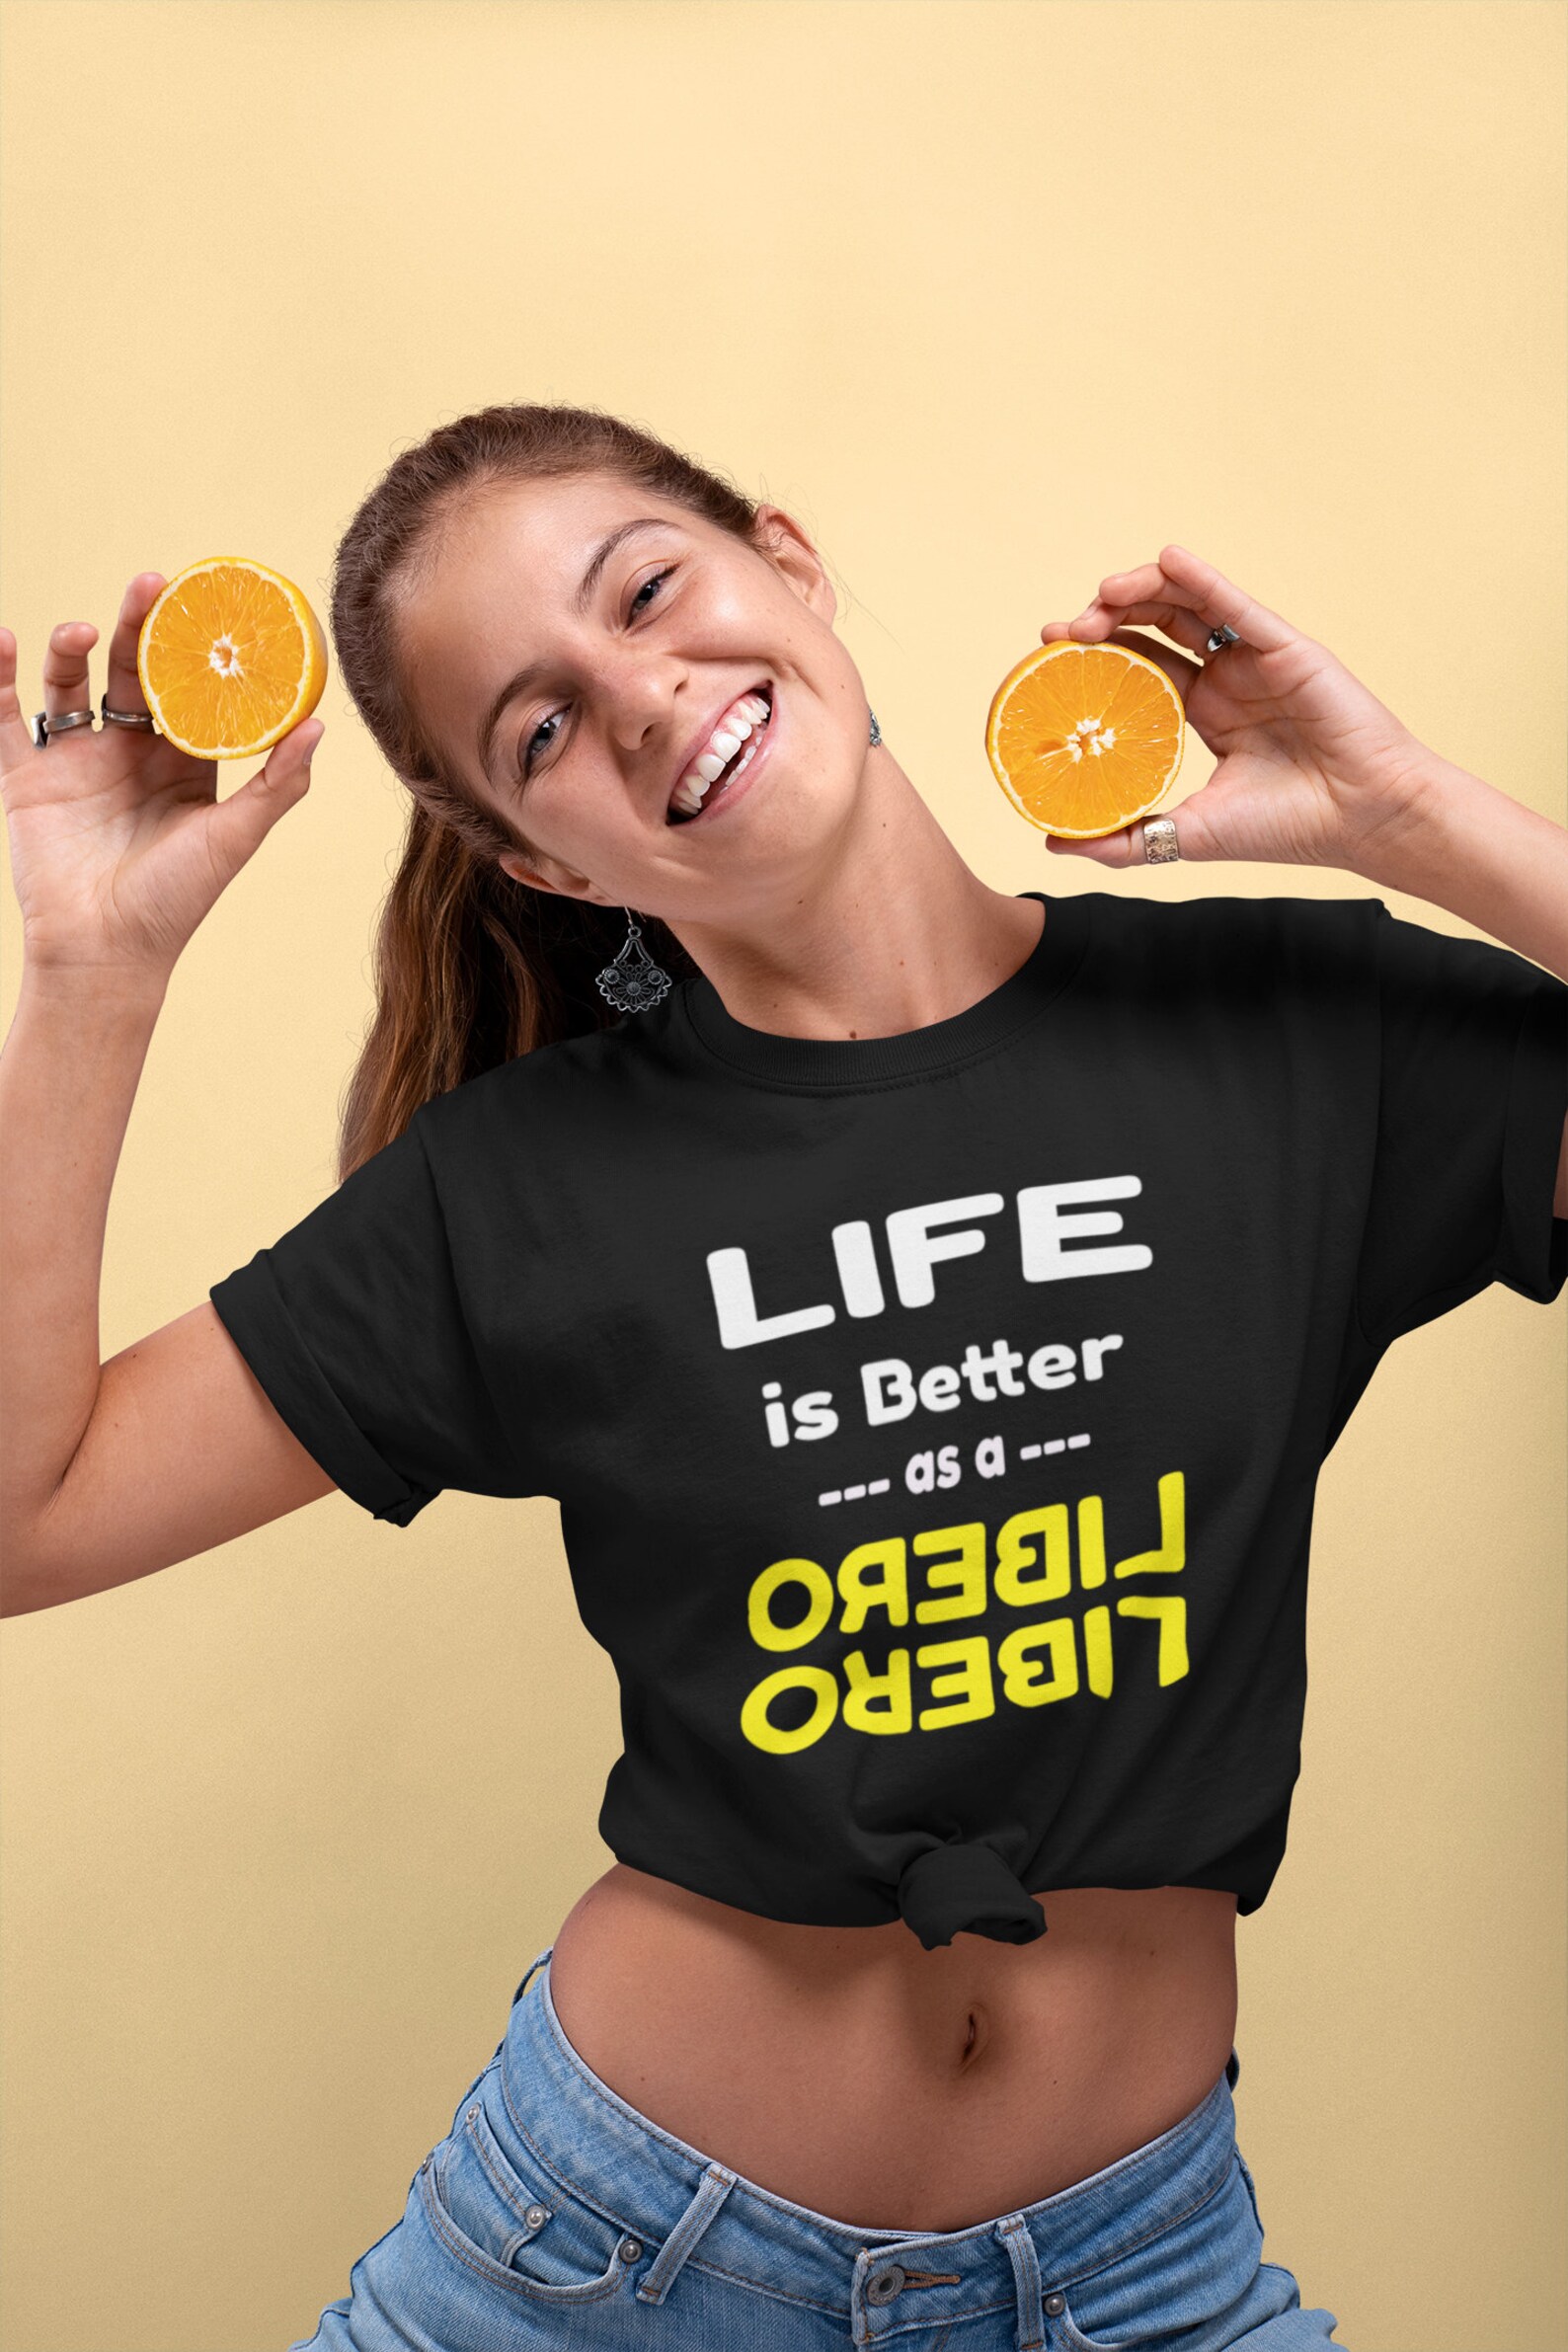 LIFE IS Better As A LIBERO 
Bestselling Libero Volleyball Shirts 
Cute short volleyball quotes on Volleyball Tees on ETSY! Shop Now at Volleybragswag.